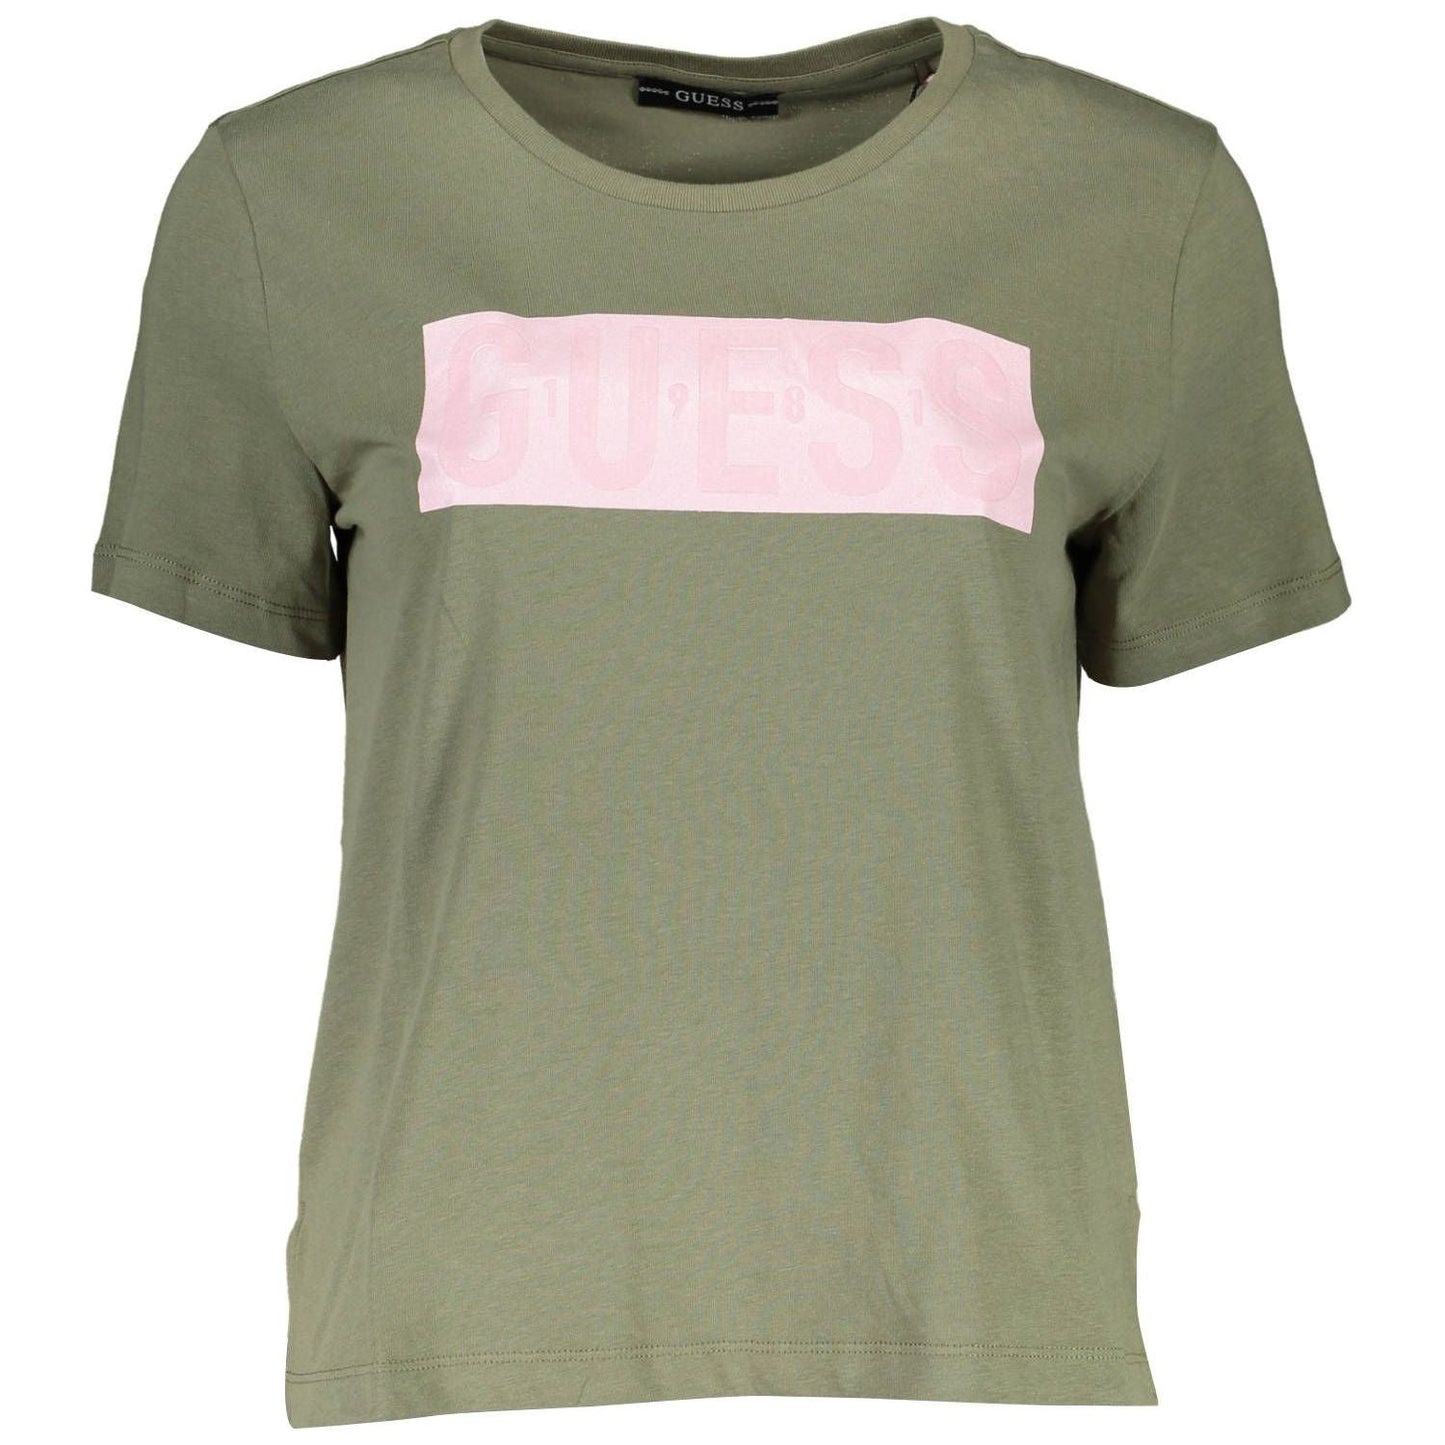 Guess Jeans Chic Green Logo Tee with Short Sleeves chic-green-logo-tee-with-short-sleeves